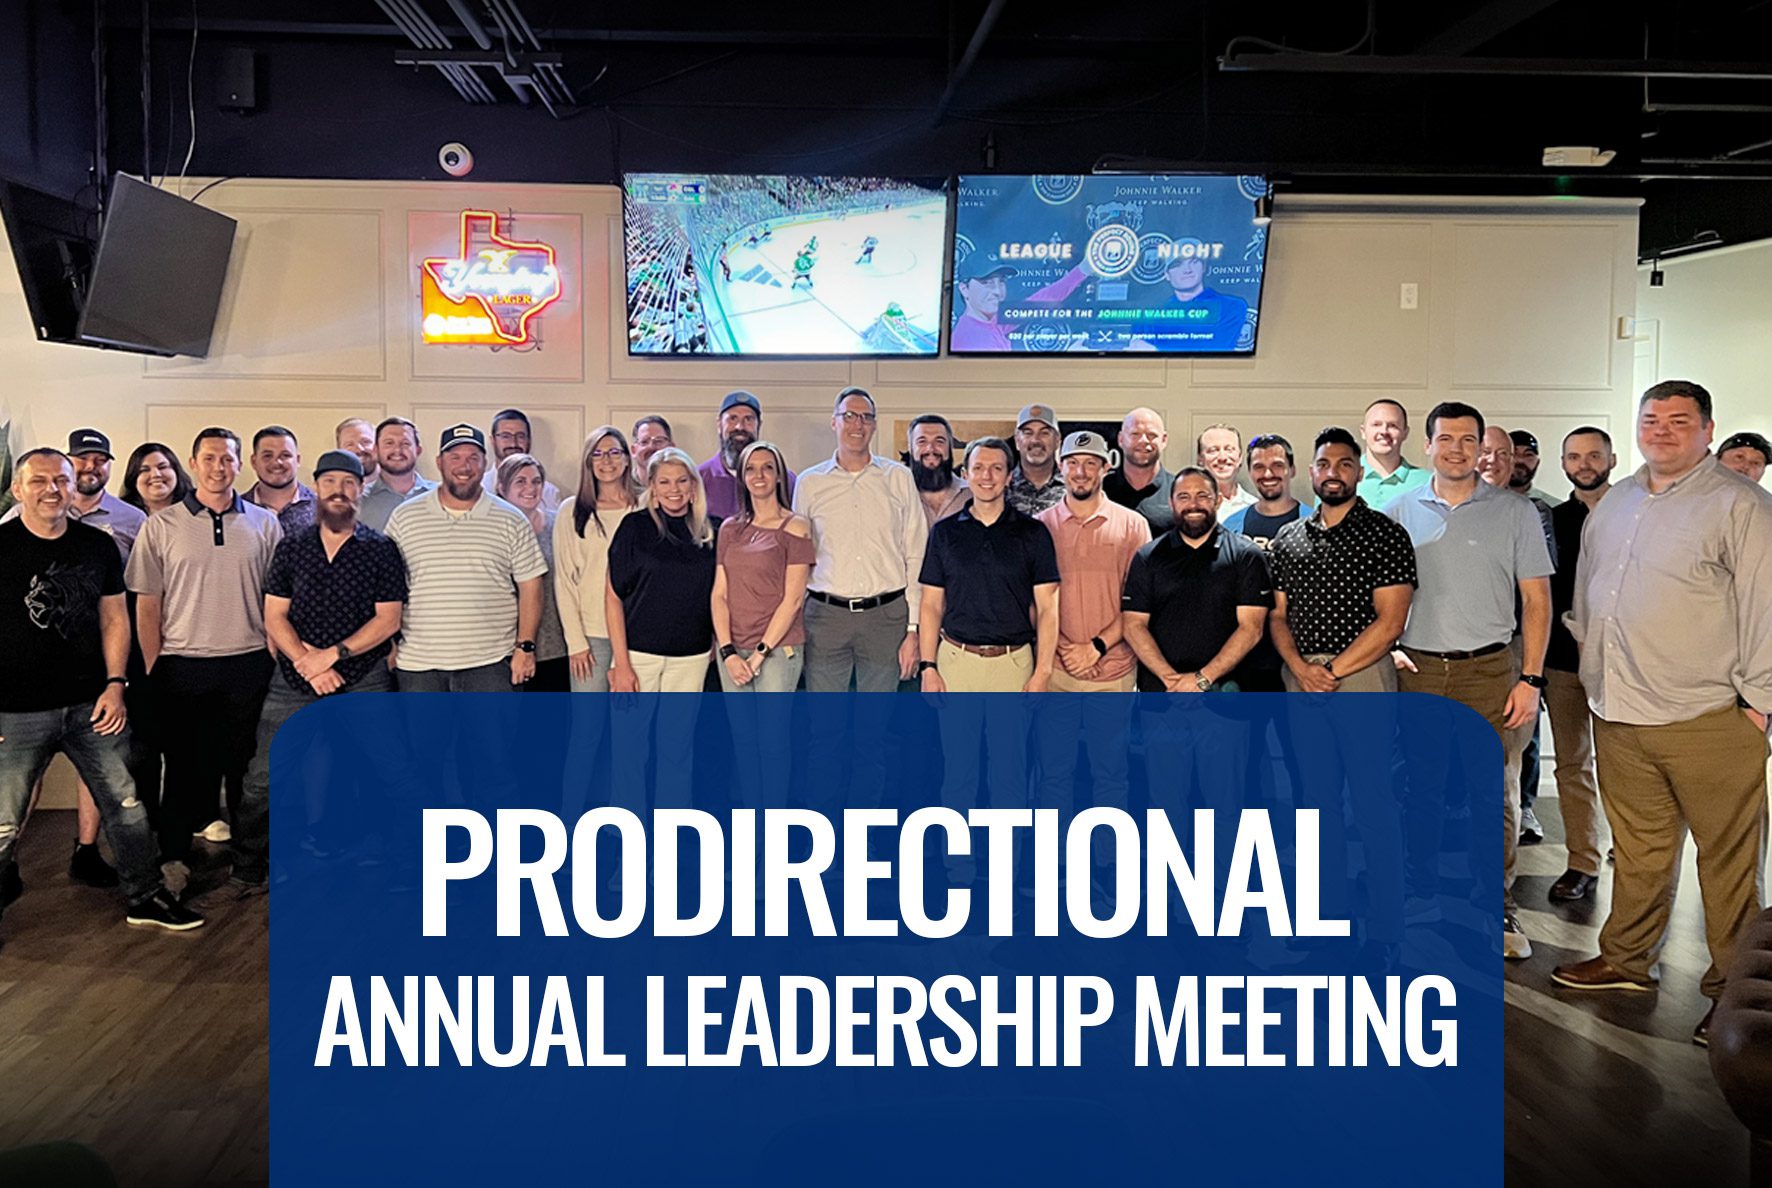 Featured image for “Prodirectional Annual Leadership Meeting”